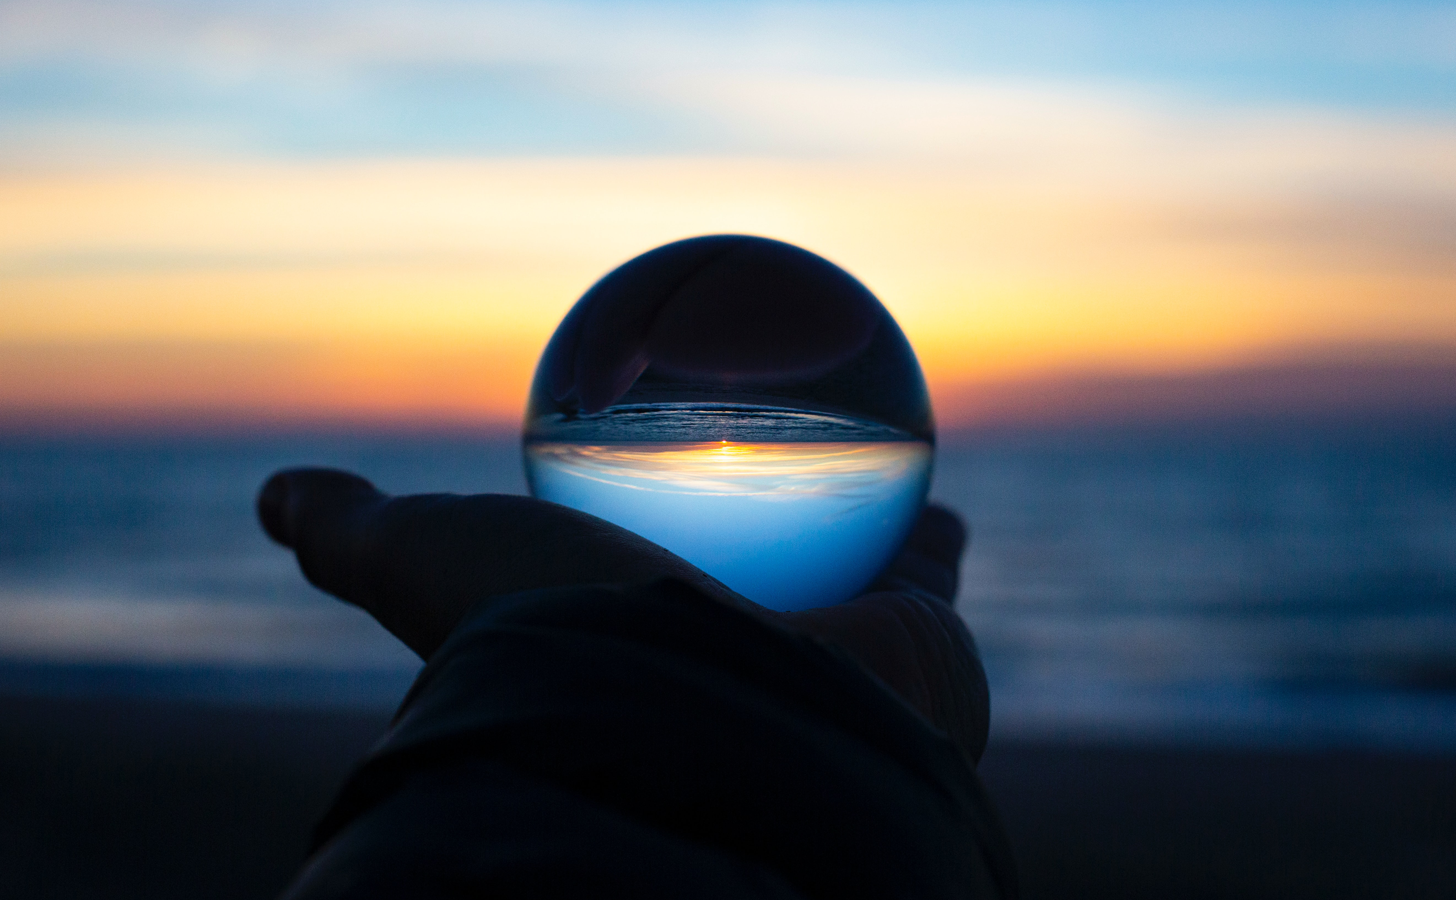 A person holding a crystal ball looking out onto the ocean